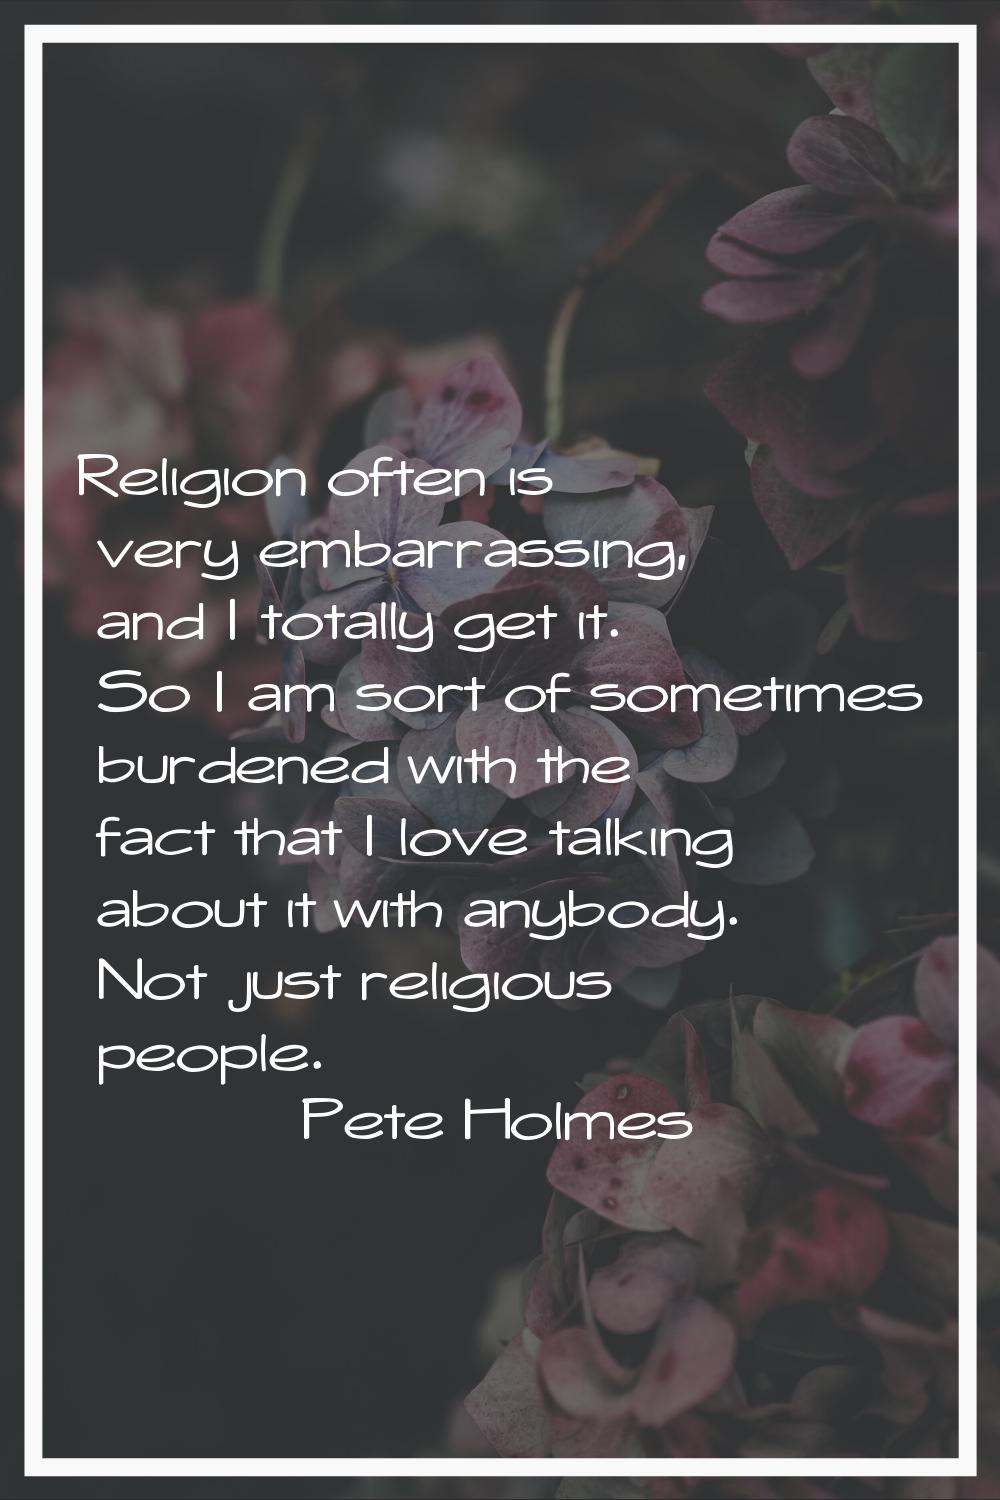 Religion often is very embarrassing, and I totally get it. So I am sort of sometimes burdened with 